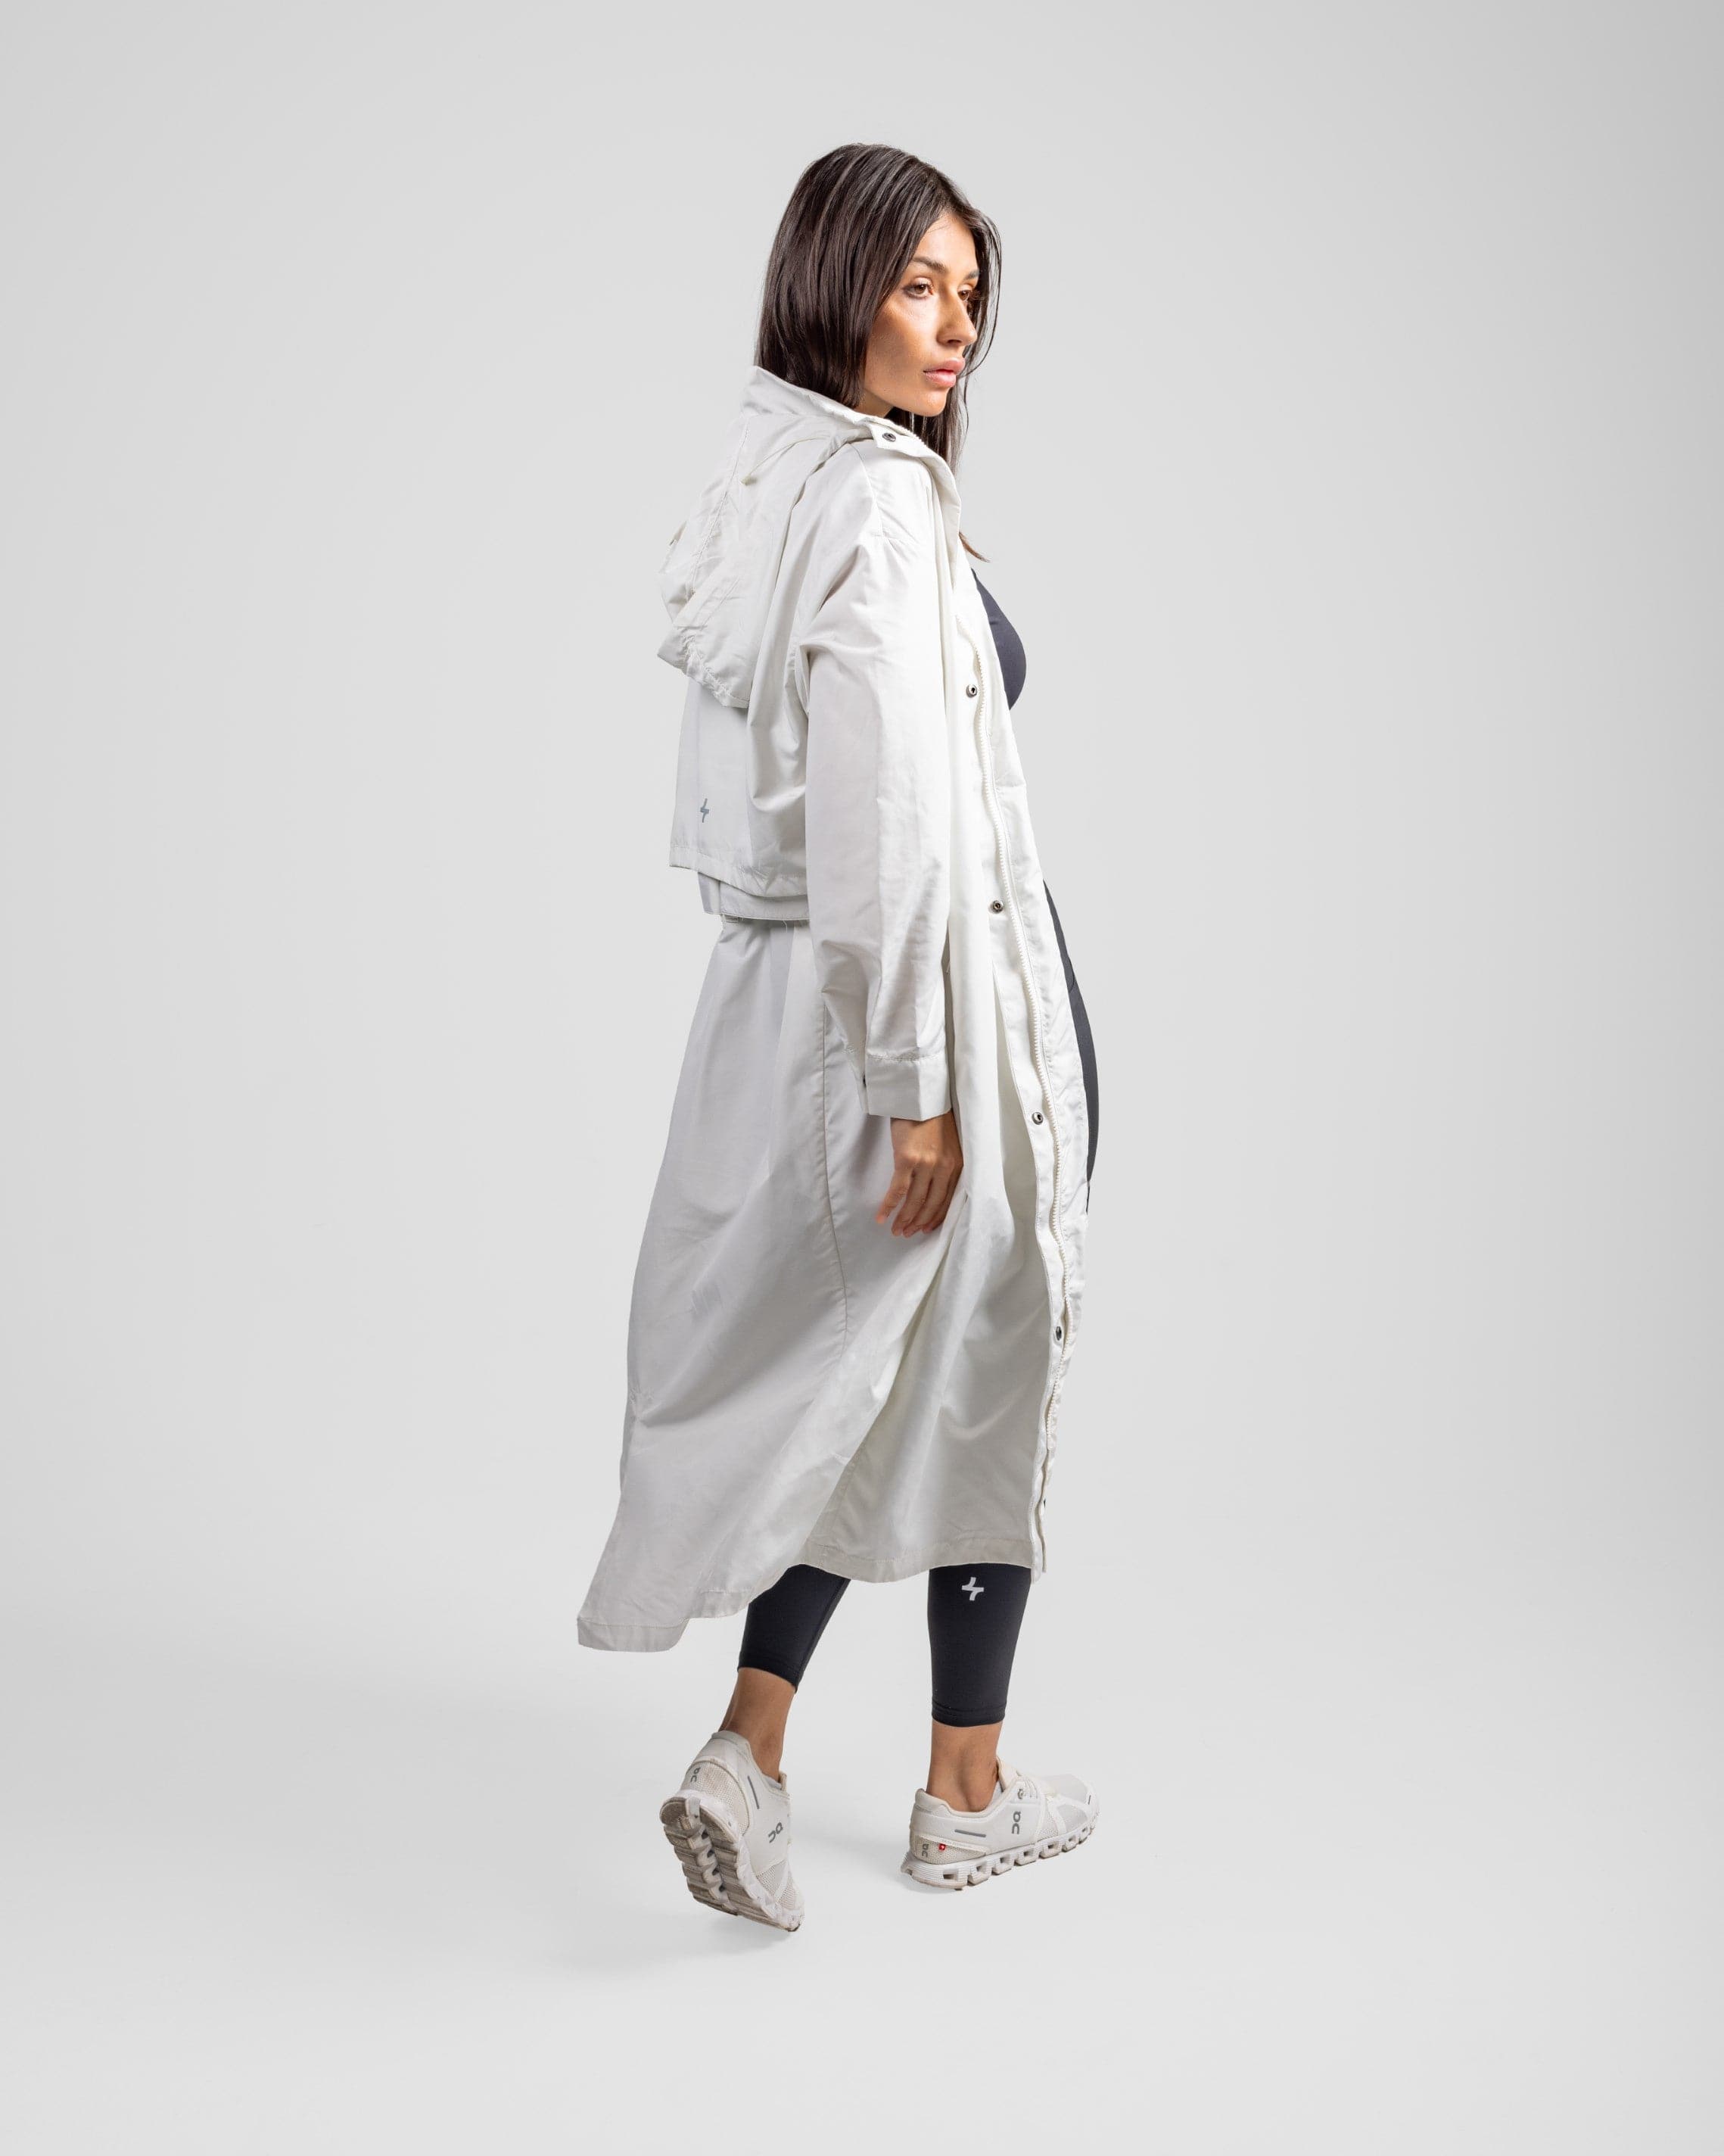 A model in a stylish modest black MAK LIGHT PARKA by Qynda with a breathable mesh lining over a dark outfit, looking back over her shoulder, set against a plain light gray background.